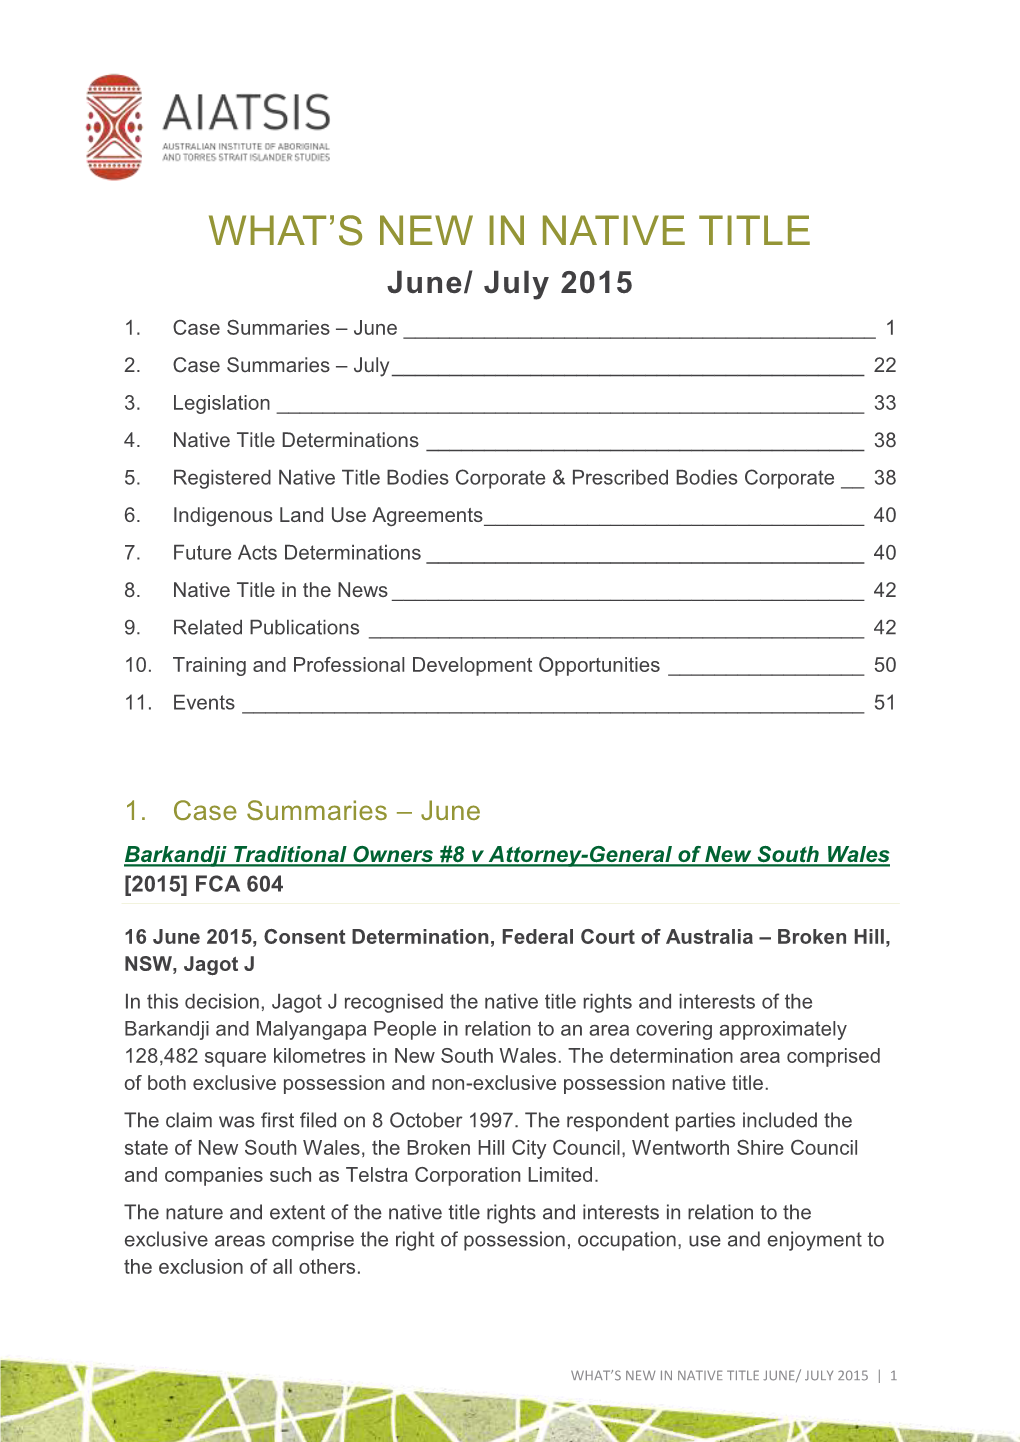 What's New in Native Title June July 2015